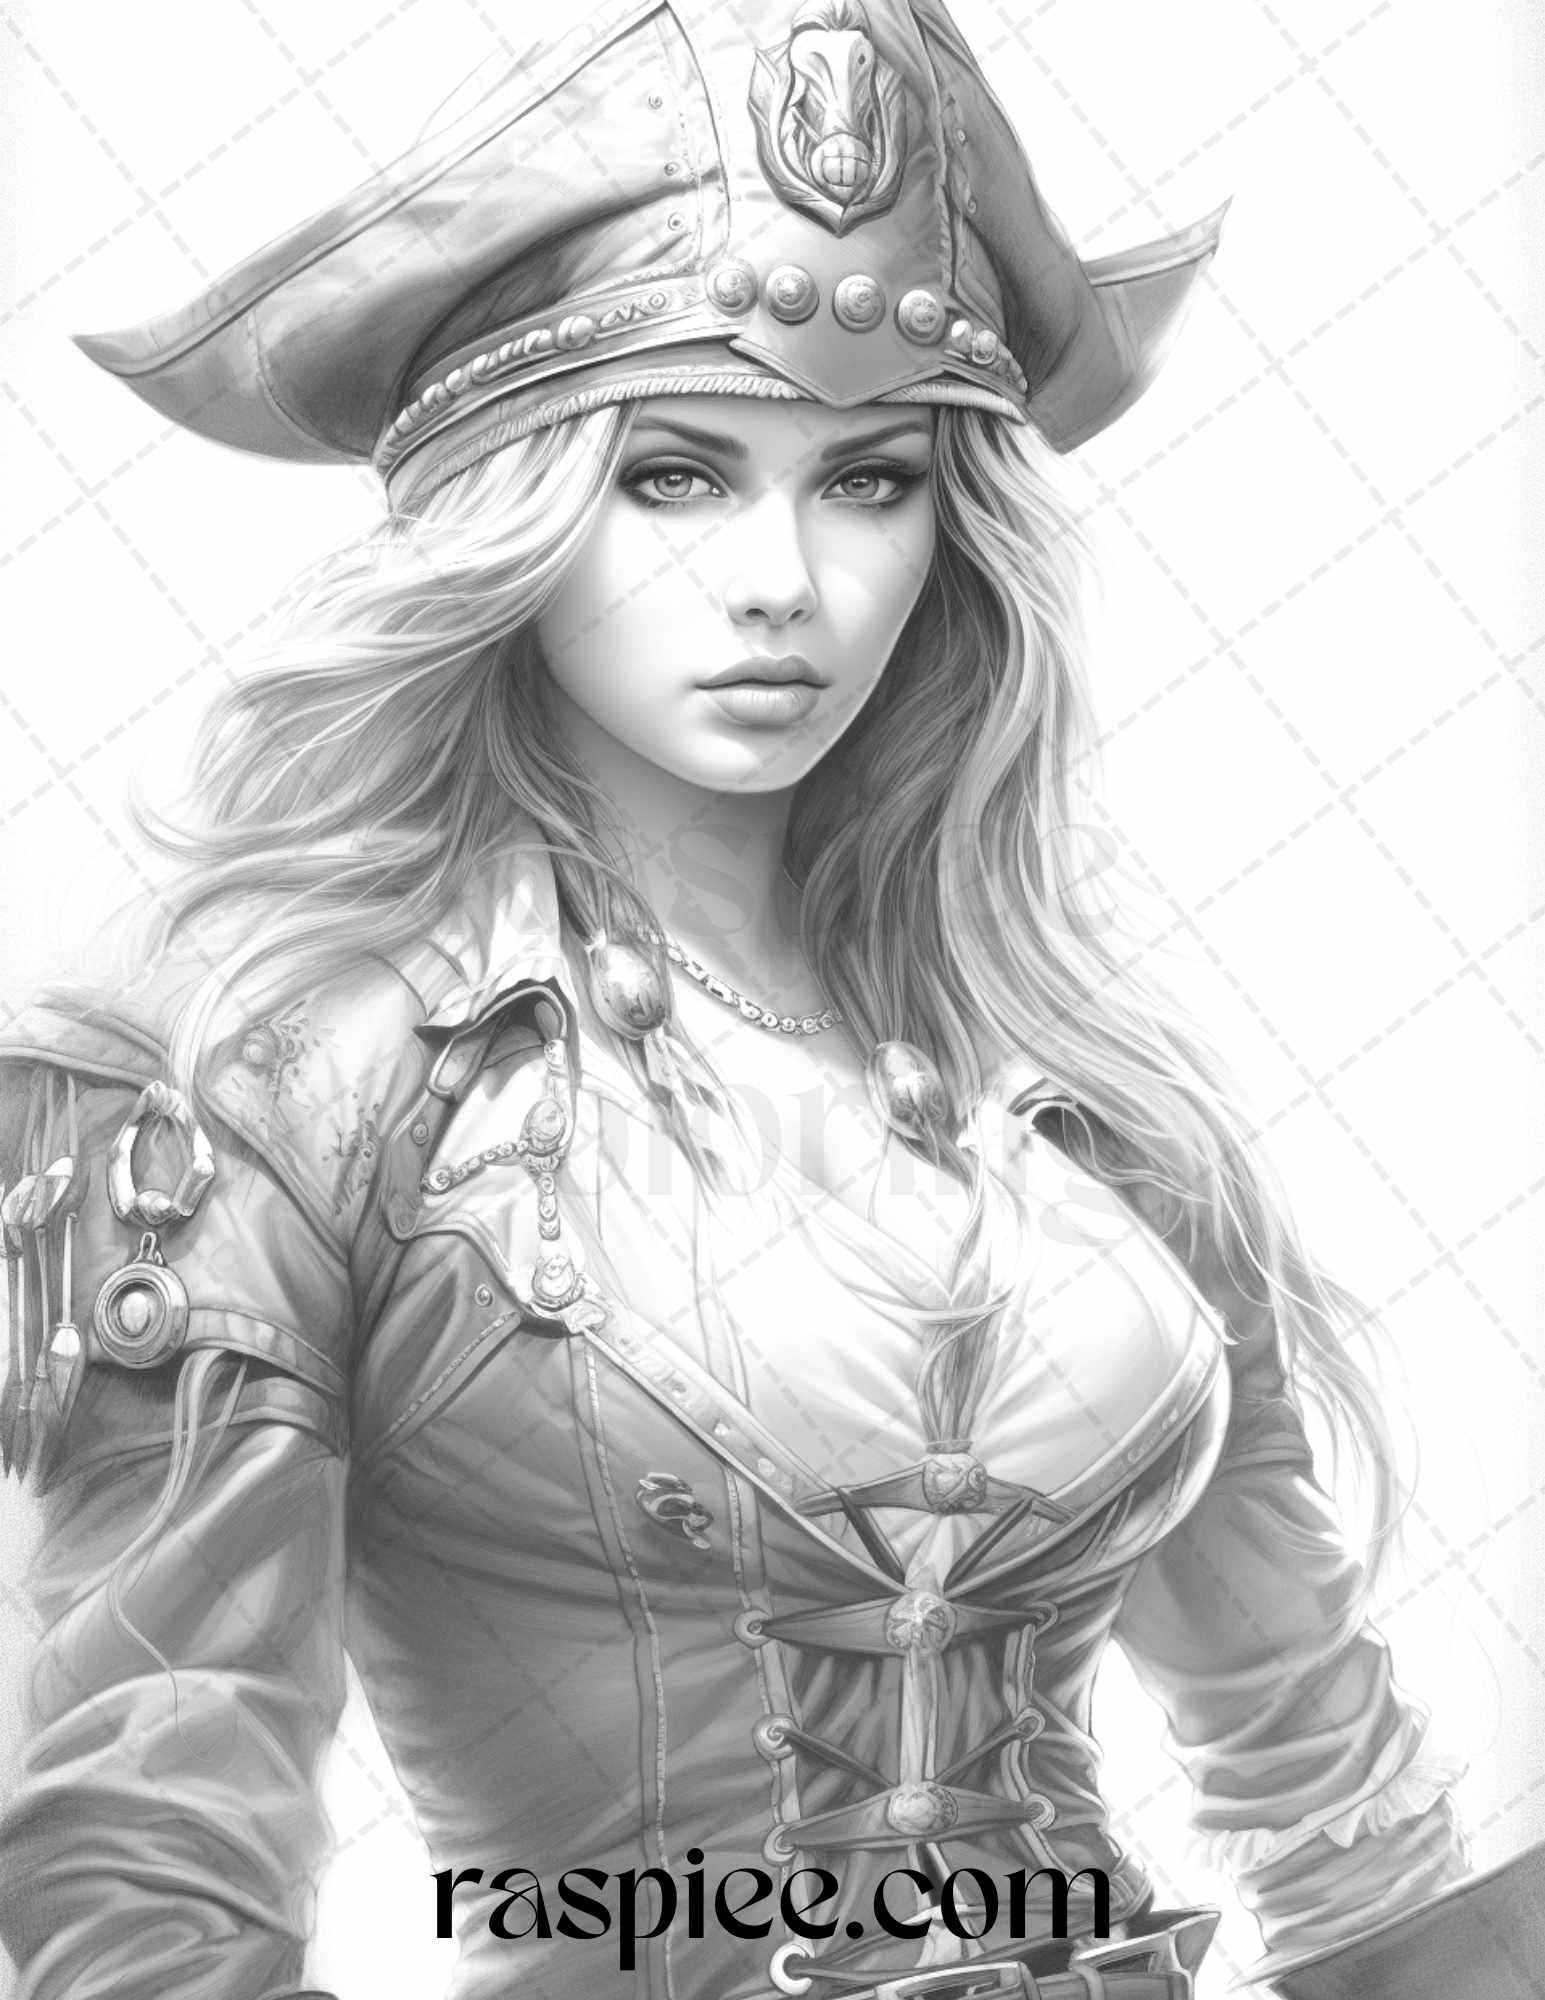 Pirate Life Grayscale Coloring Page, Nautical Designs Coloring Printable, Adult Stress Relief Coloring Page, Detailed Coloring for Adults, Intricate Pirate Artwork Download, DIY Crafts Coloring Sheet